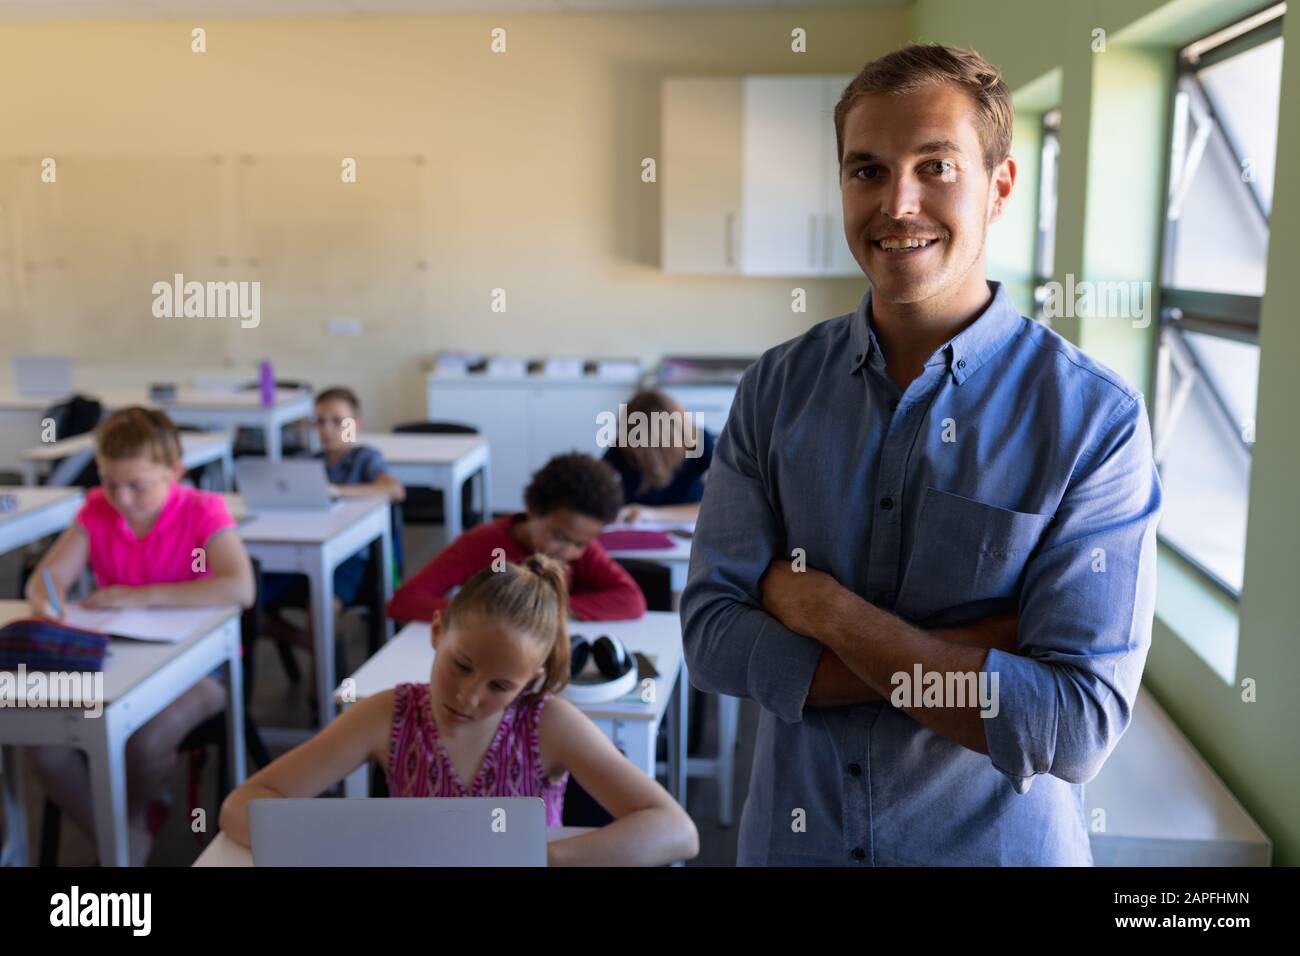 Male school teacher standing with arms crossed in an elementary school classroom Stock Photo